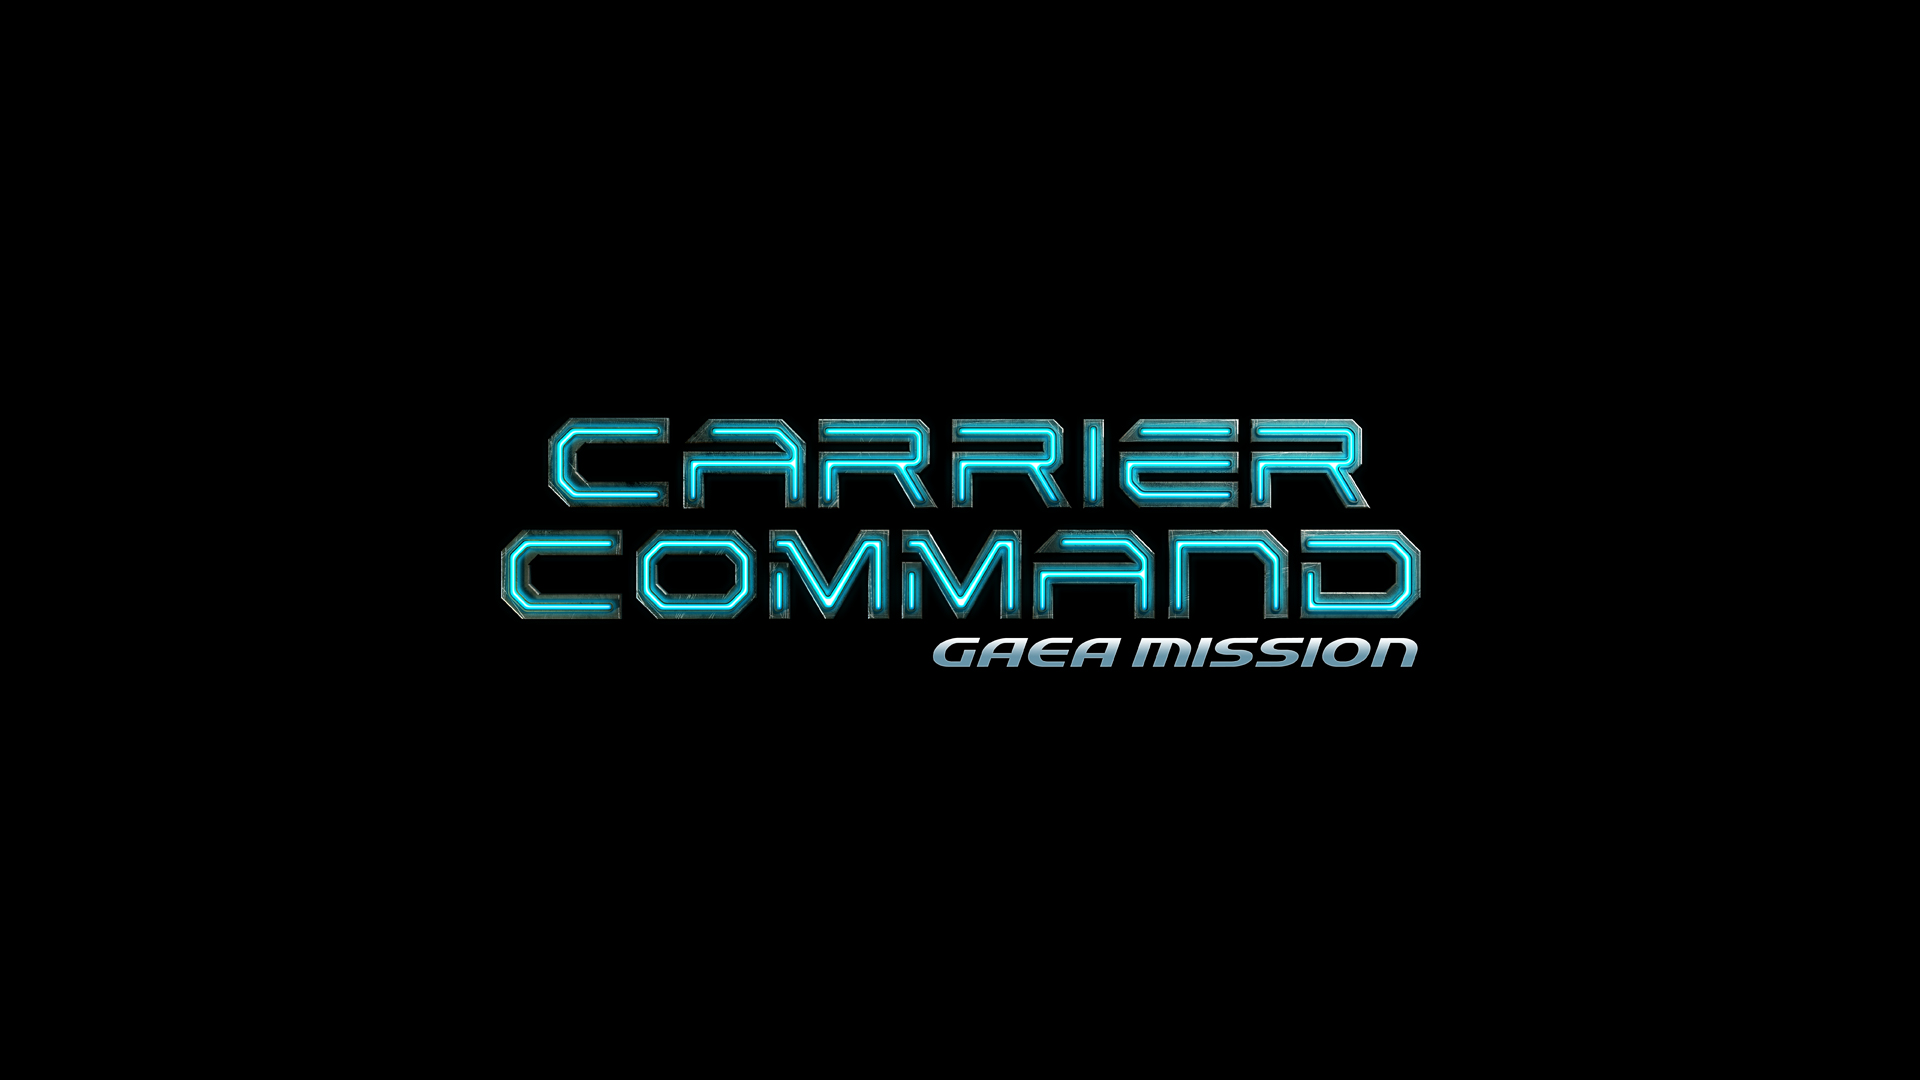 Mission player. Carrier Command: Gaea Mission Wallpaper. Gaea логотип. Carrier Command 1. Лого Carrier Command 2.